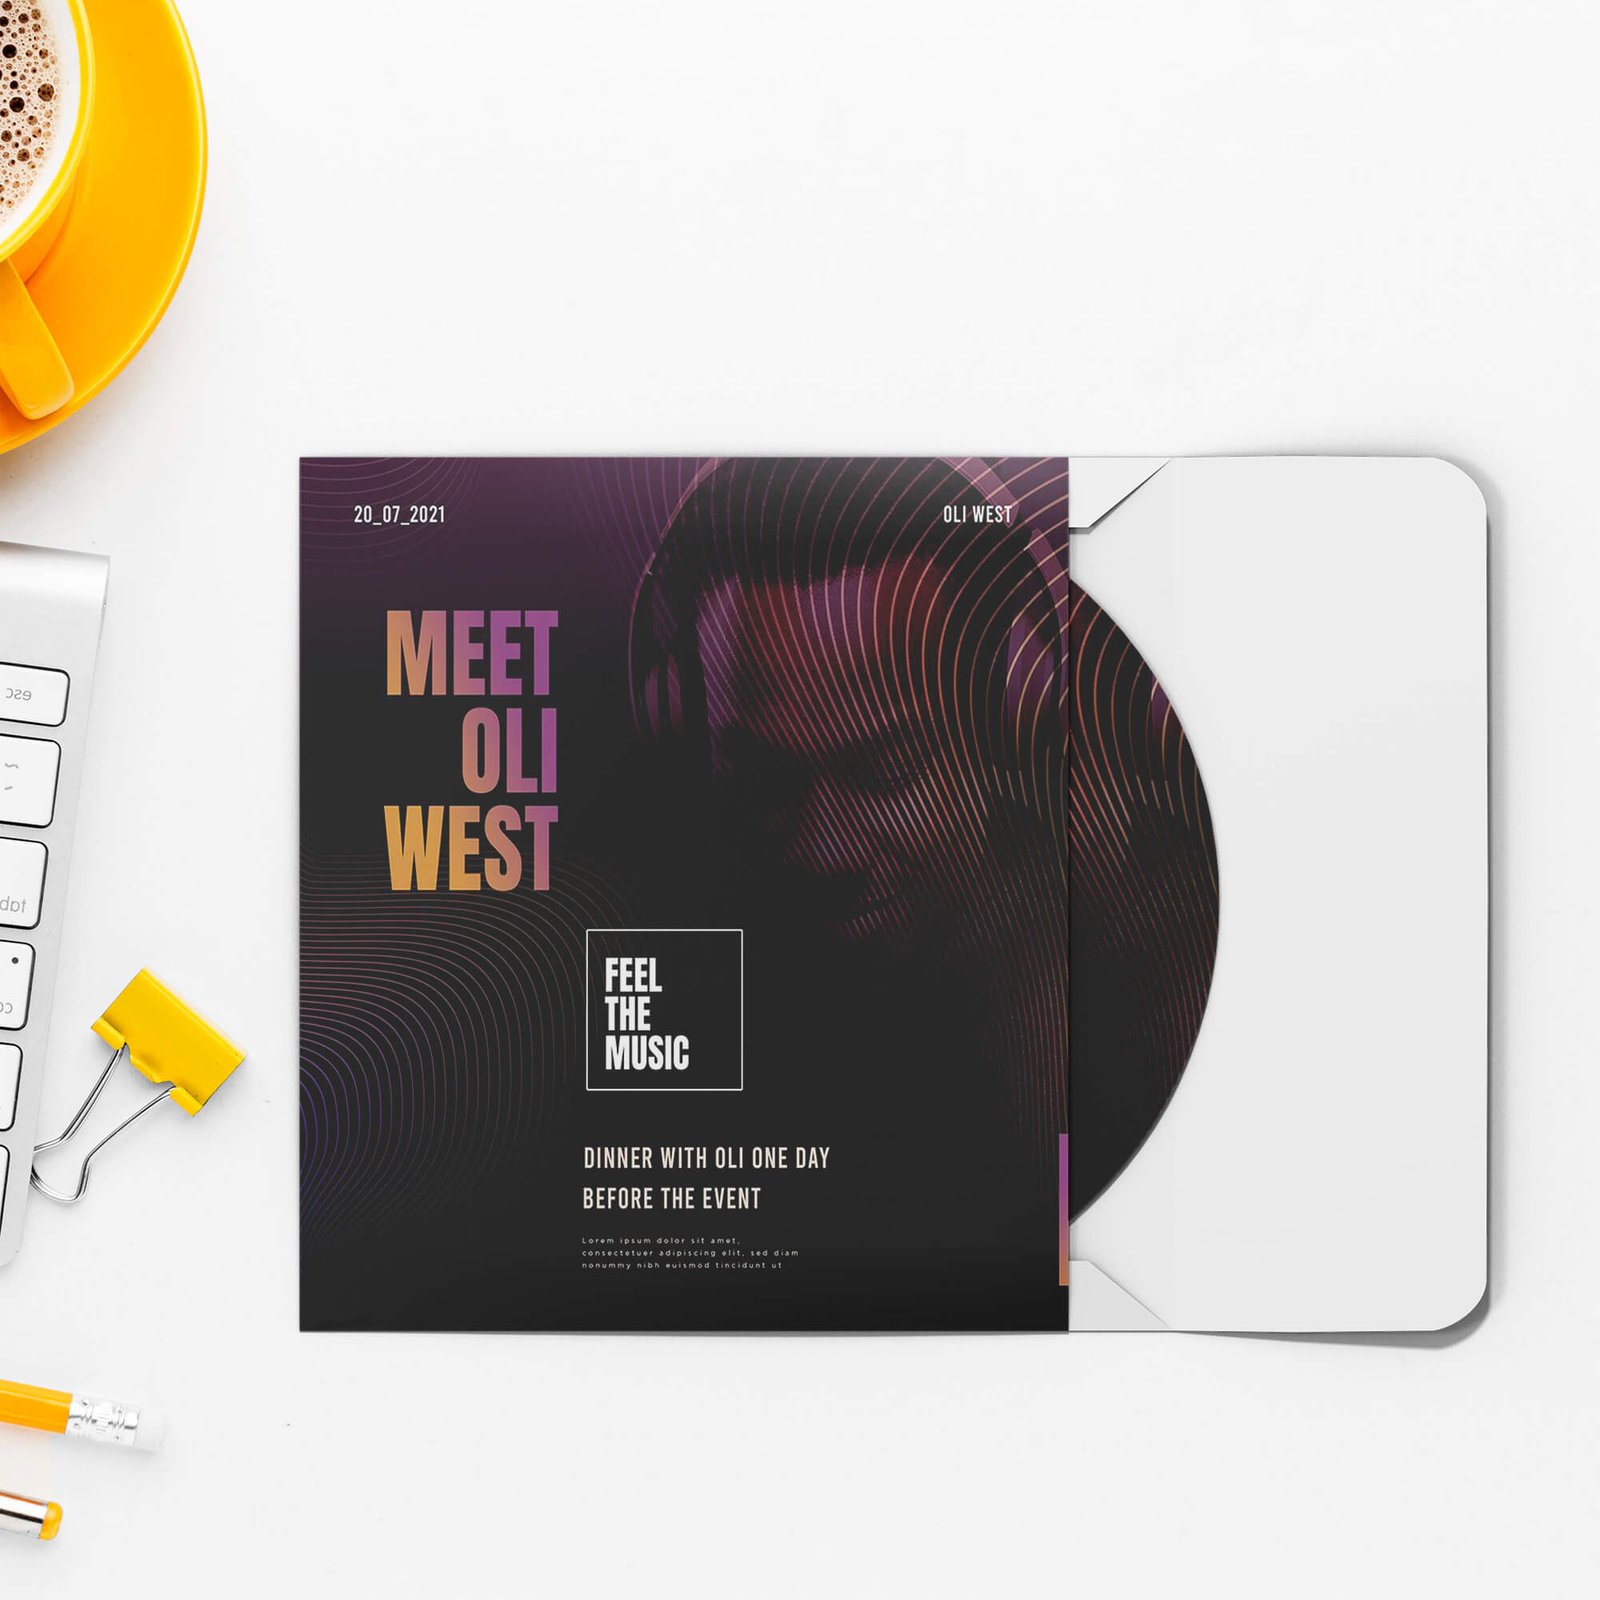 Free DVD Cover Mockup PSD Template